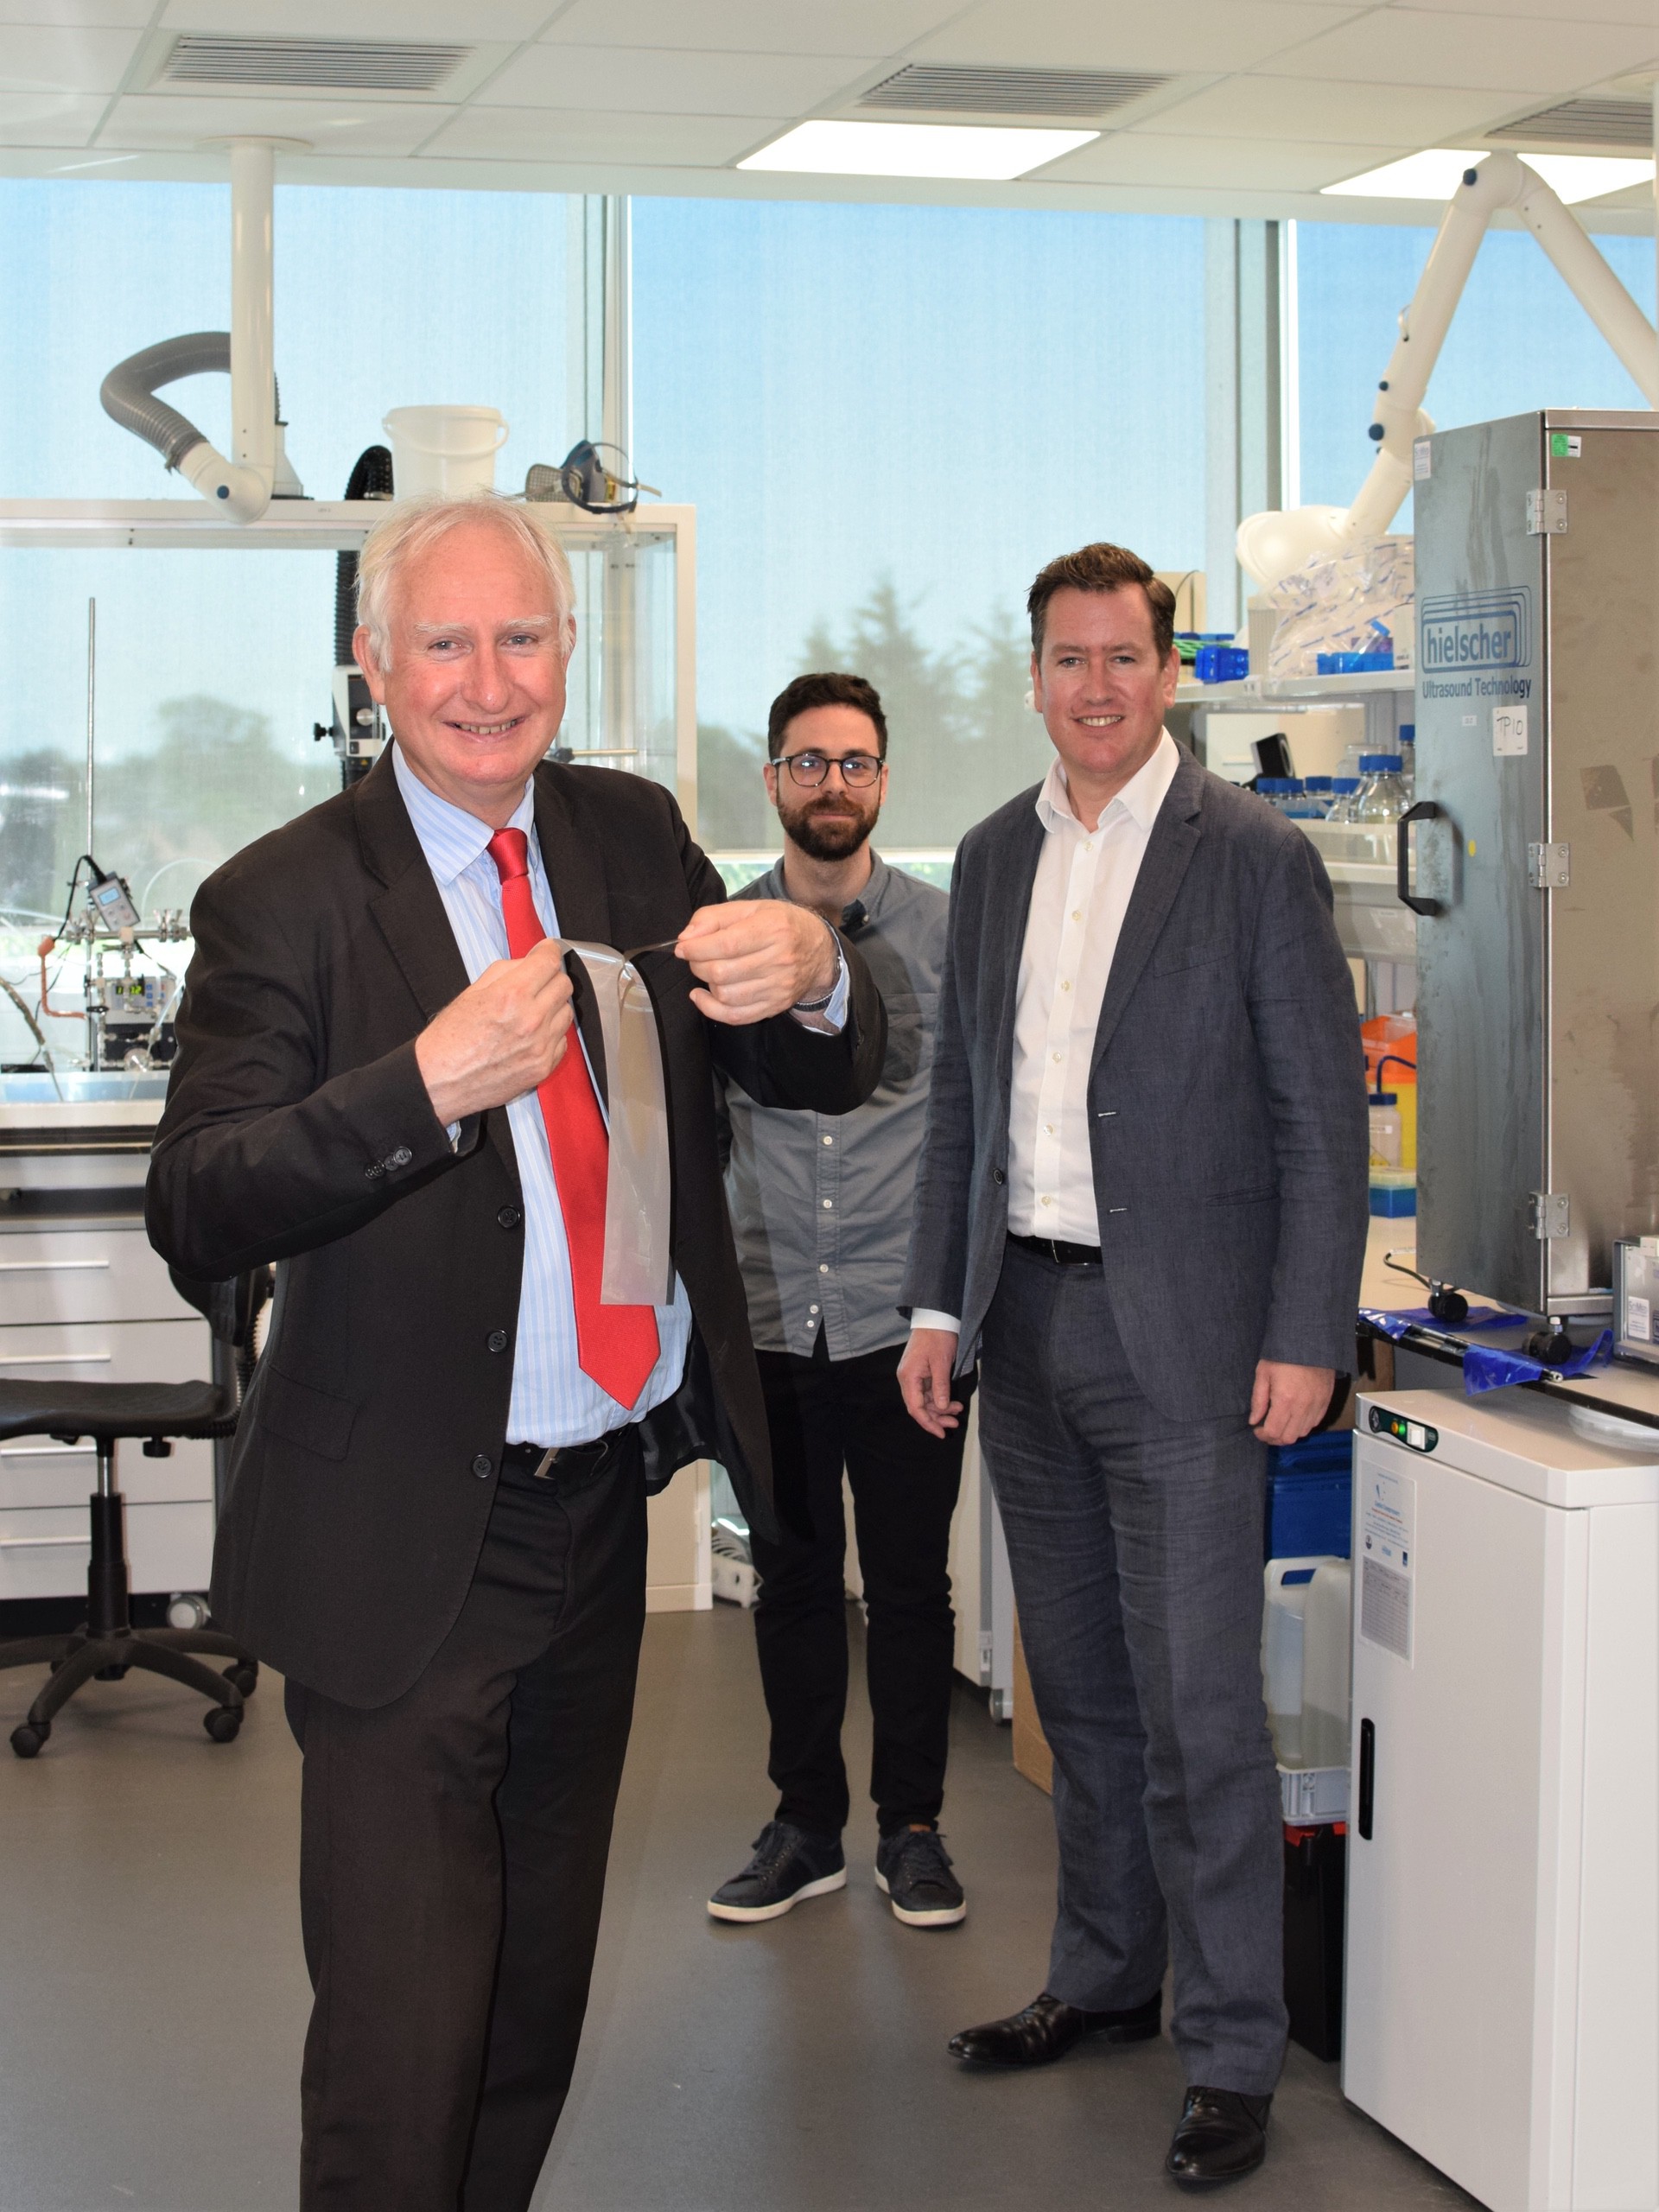 Daniel Zeichner MP visits lab of Cambridge University spin-out turning peas into next generation plastic